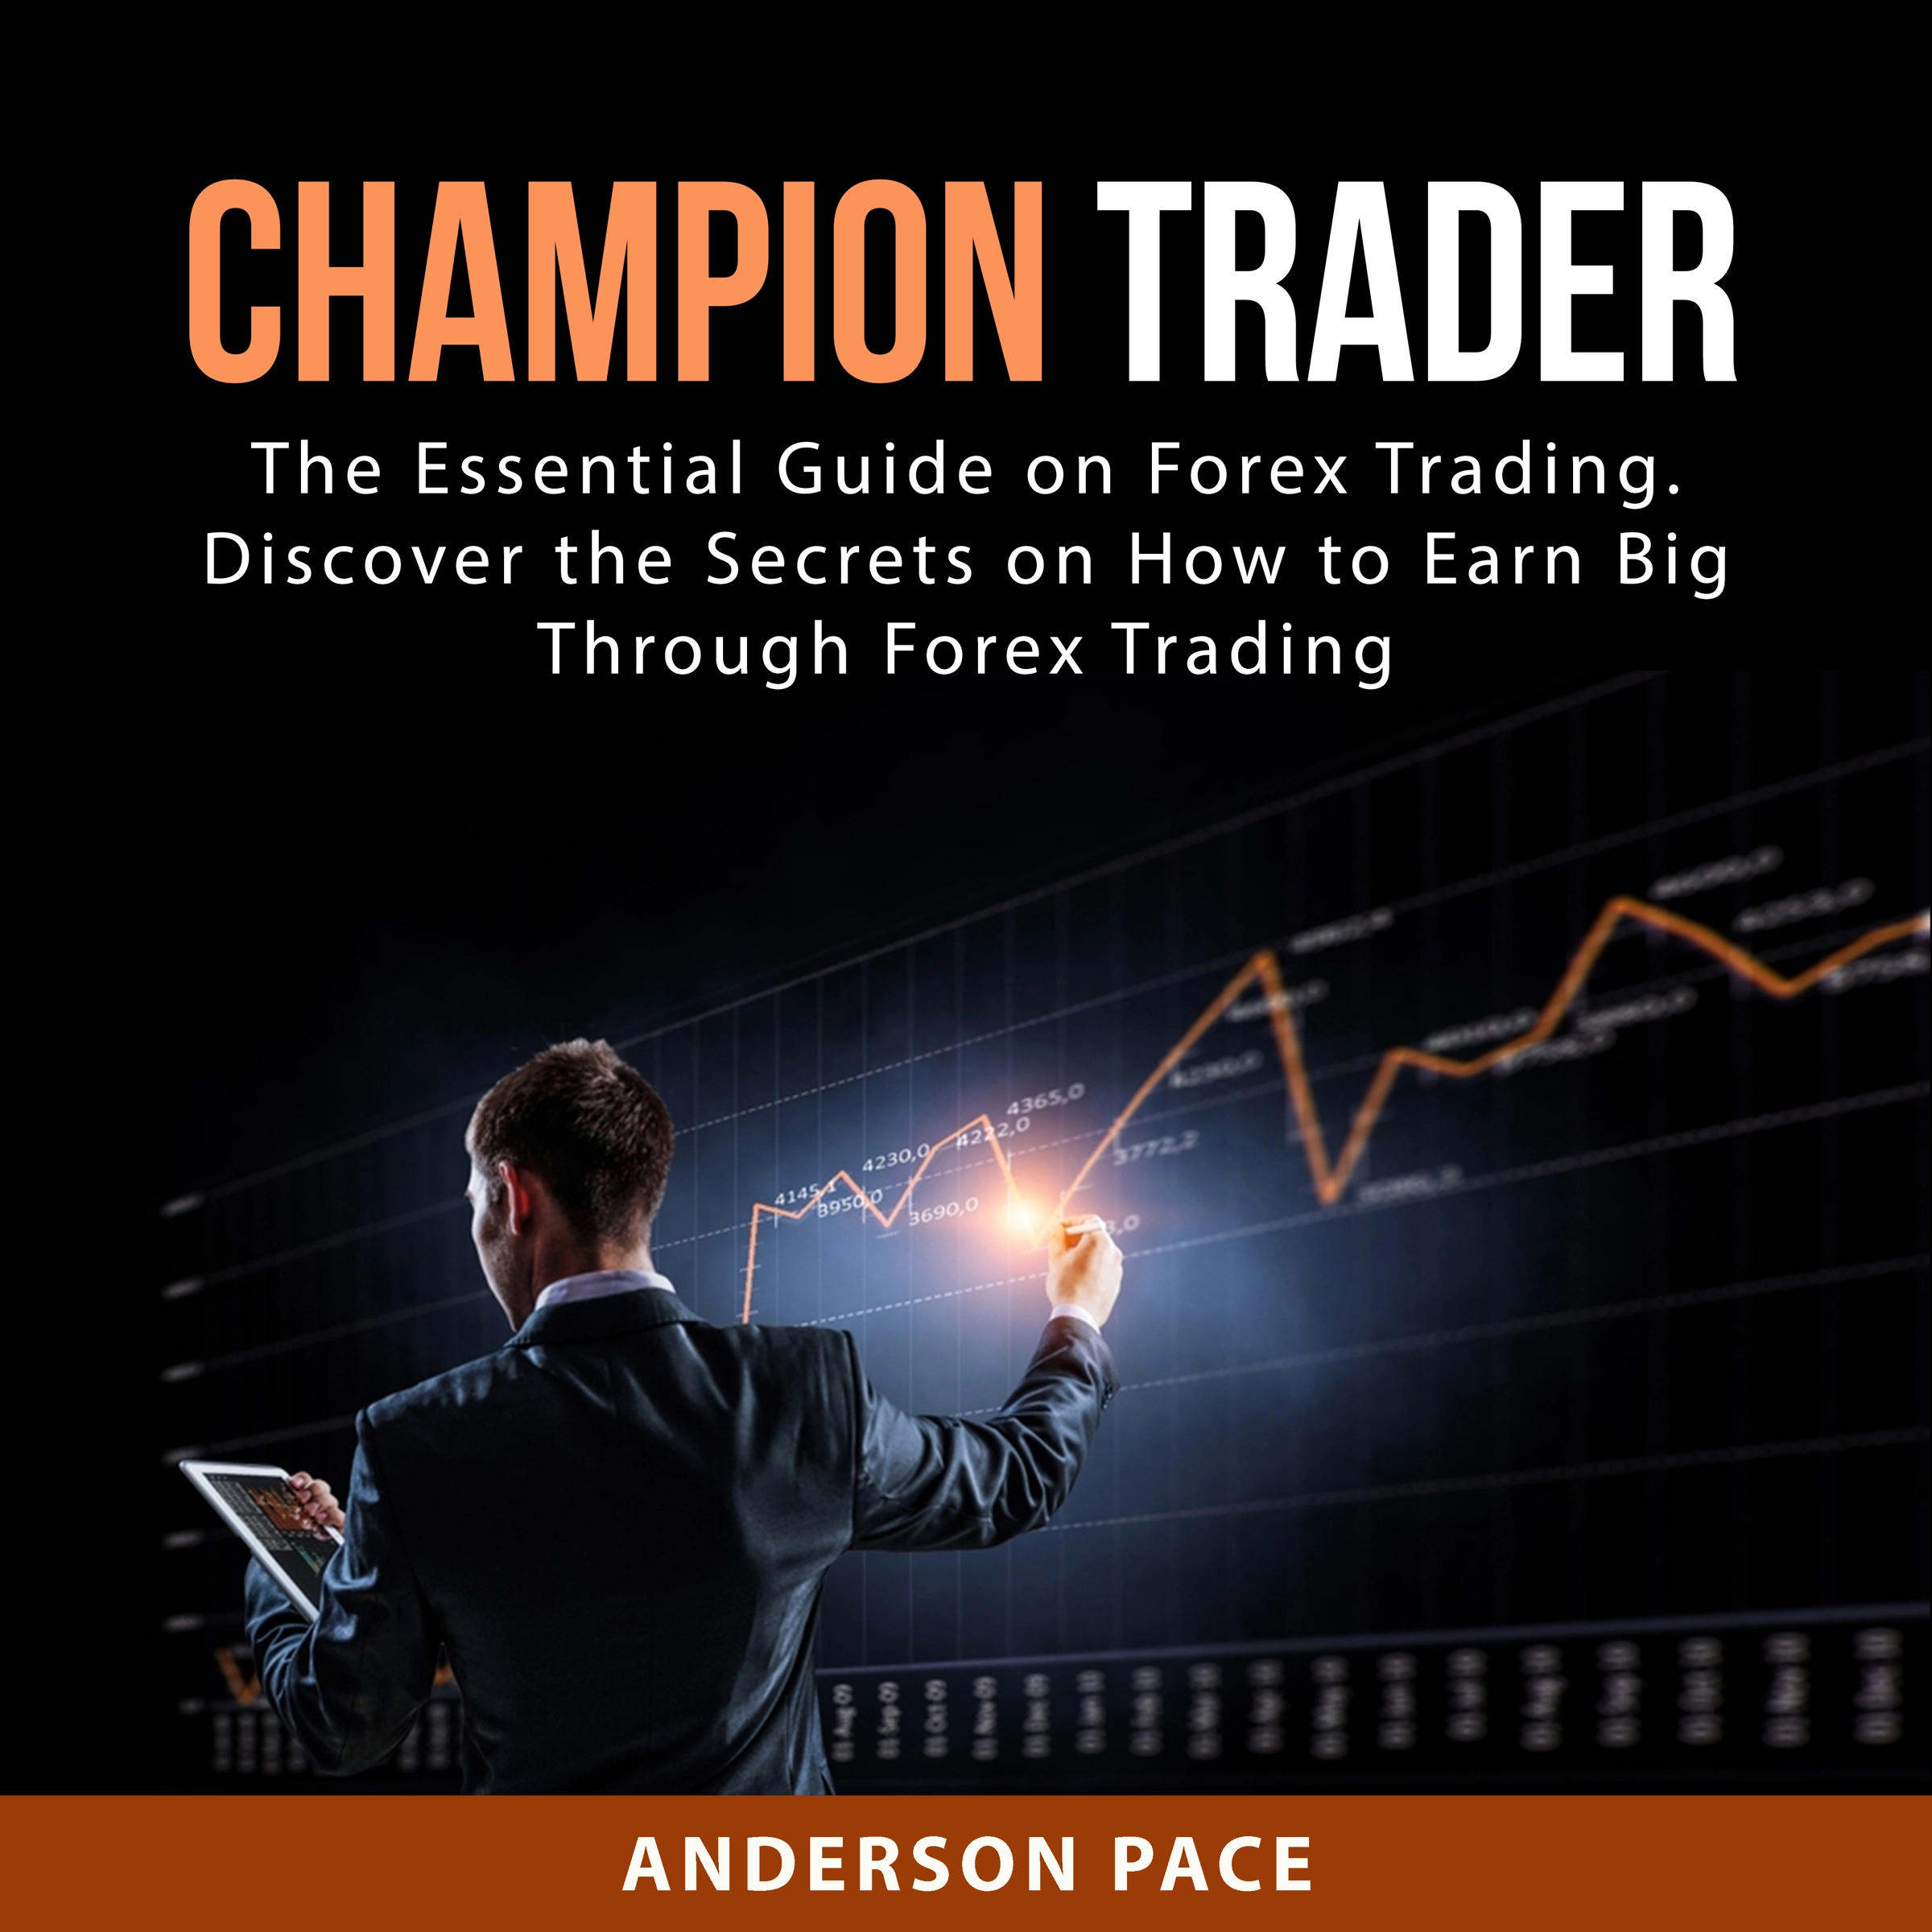 Champion Trader Audiobook by Anderson Pace